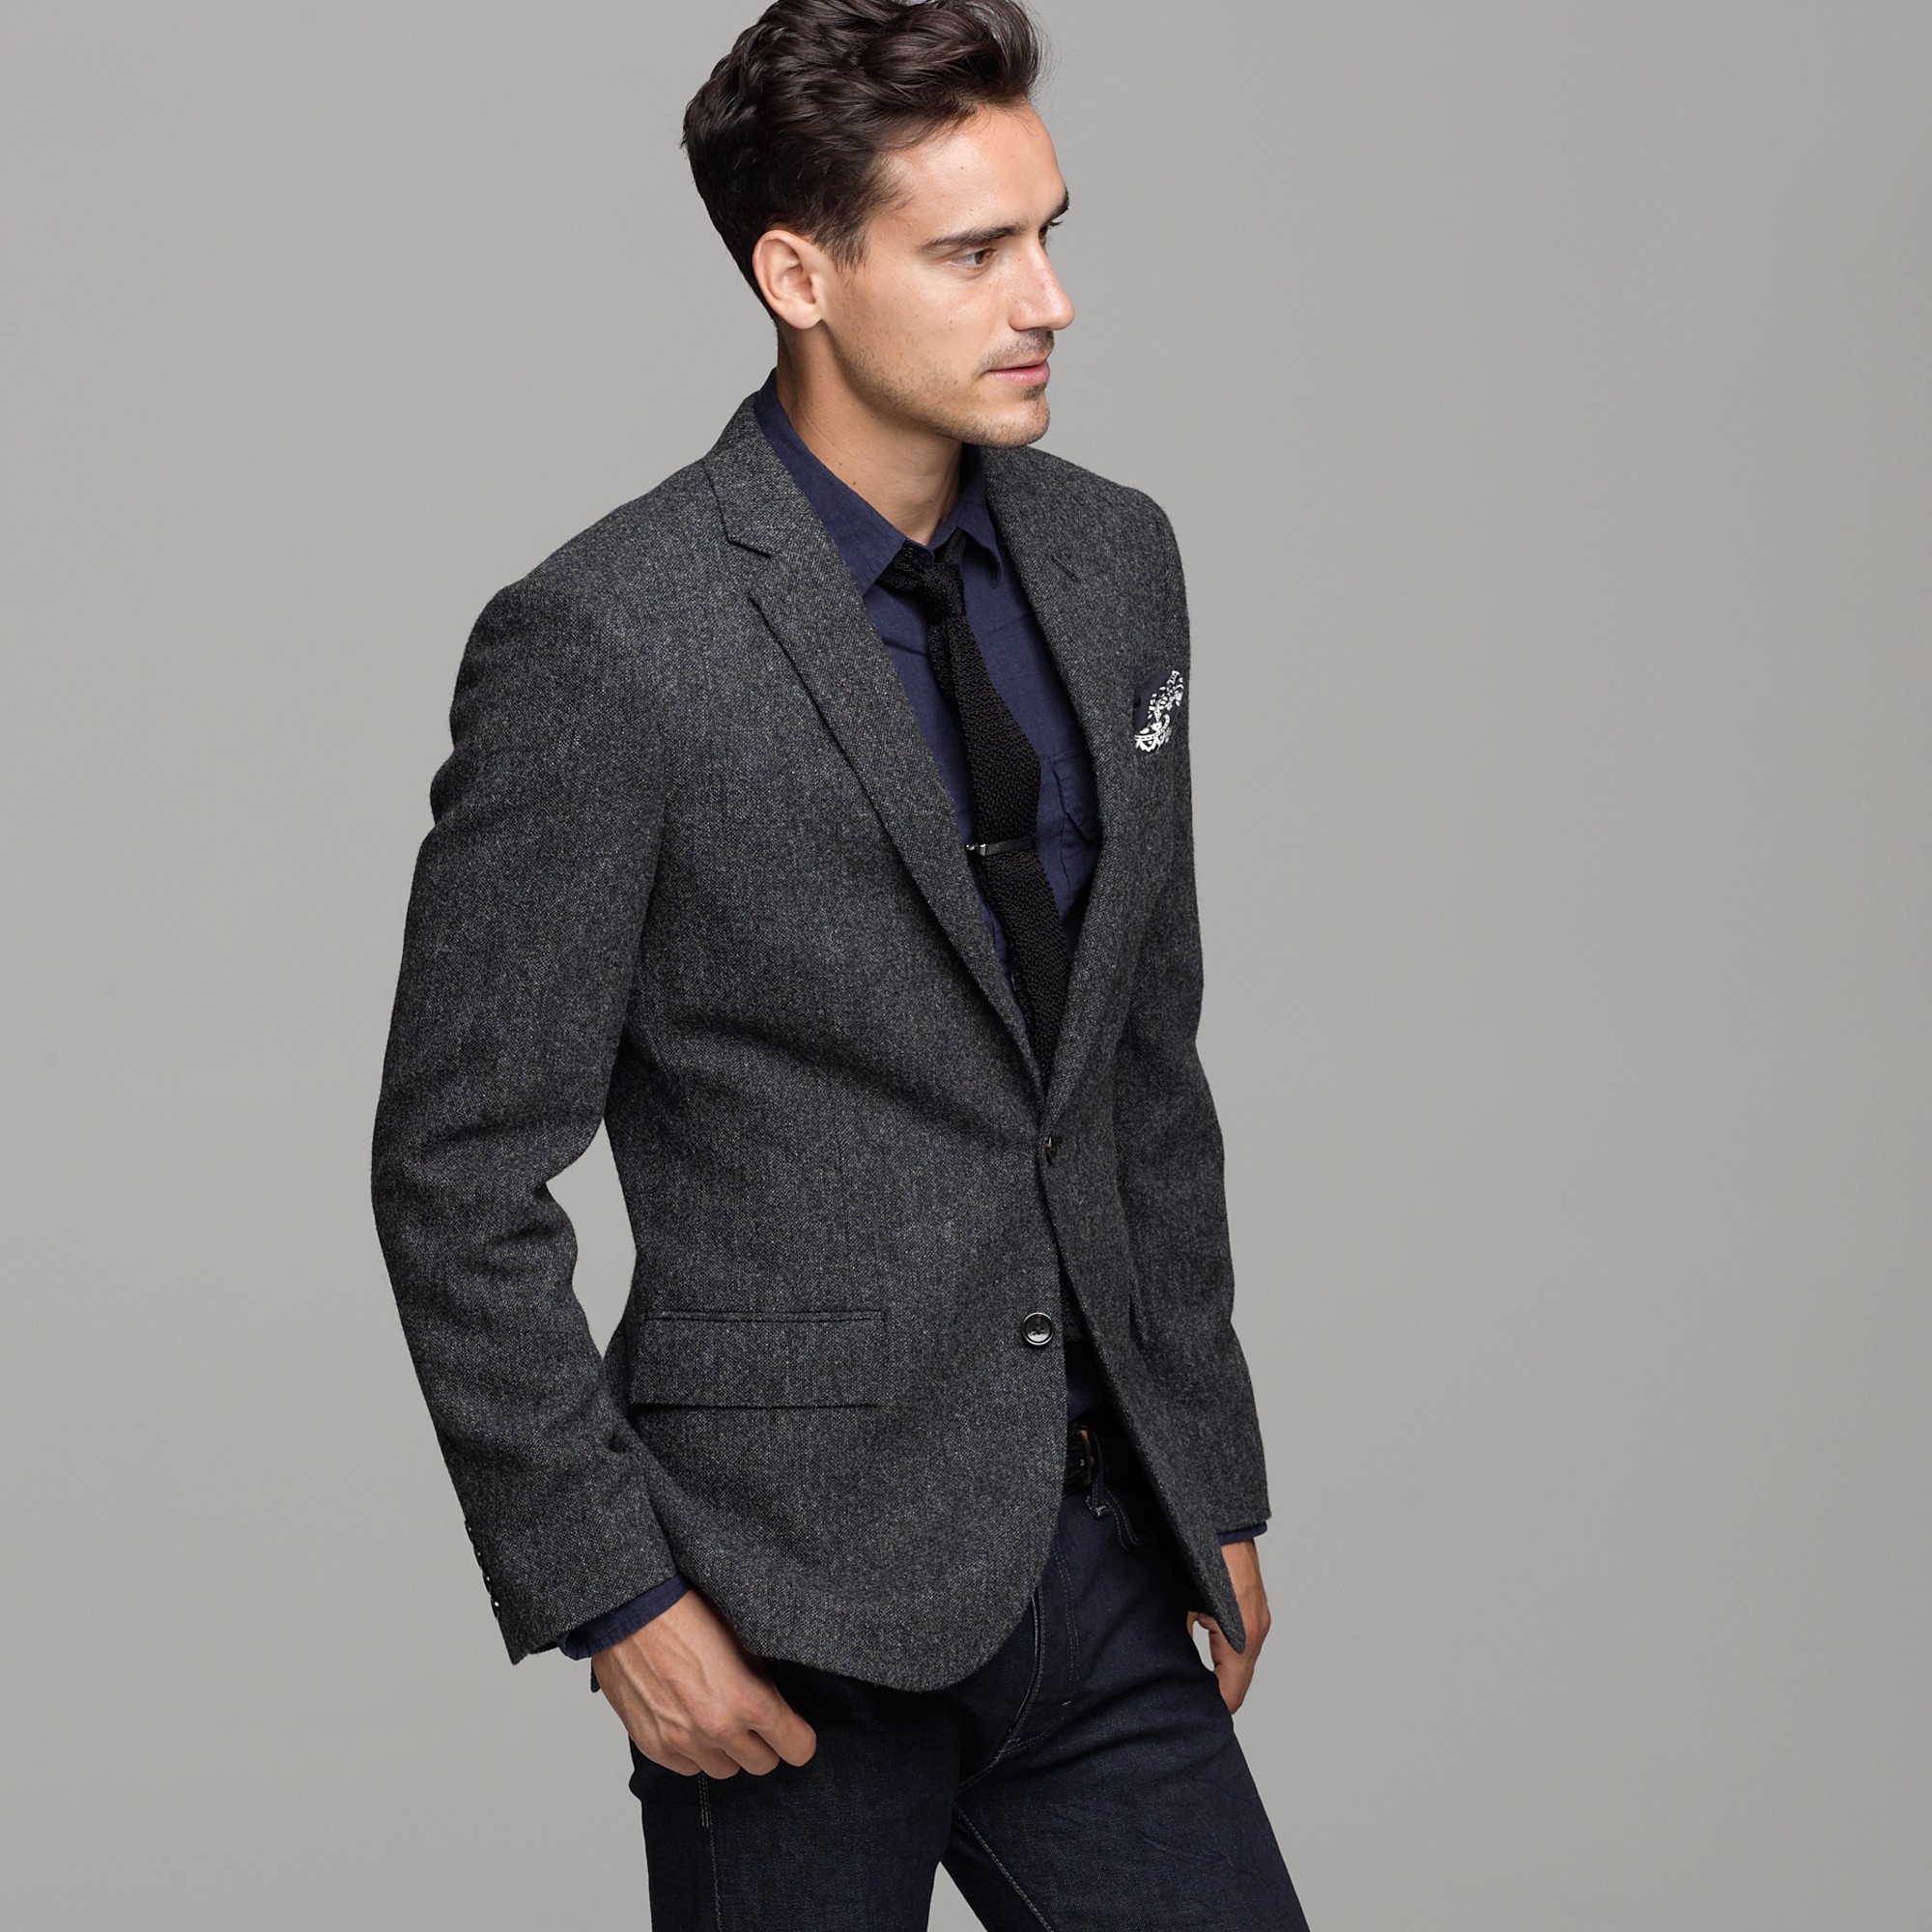 Lyst - J.Crew Ludlow Two-button Suit Jacket with Double-vented Back in ...